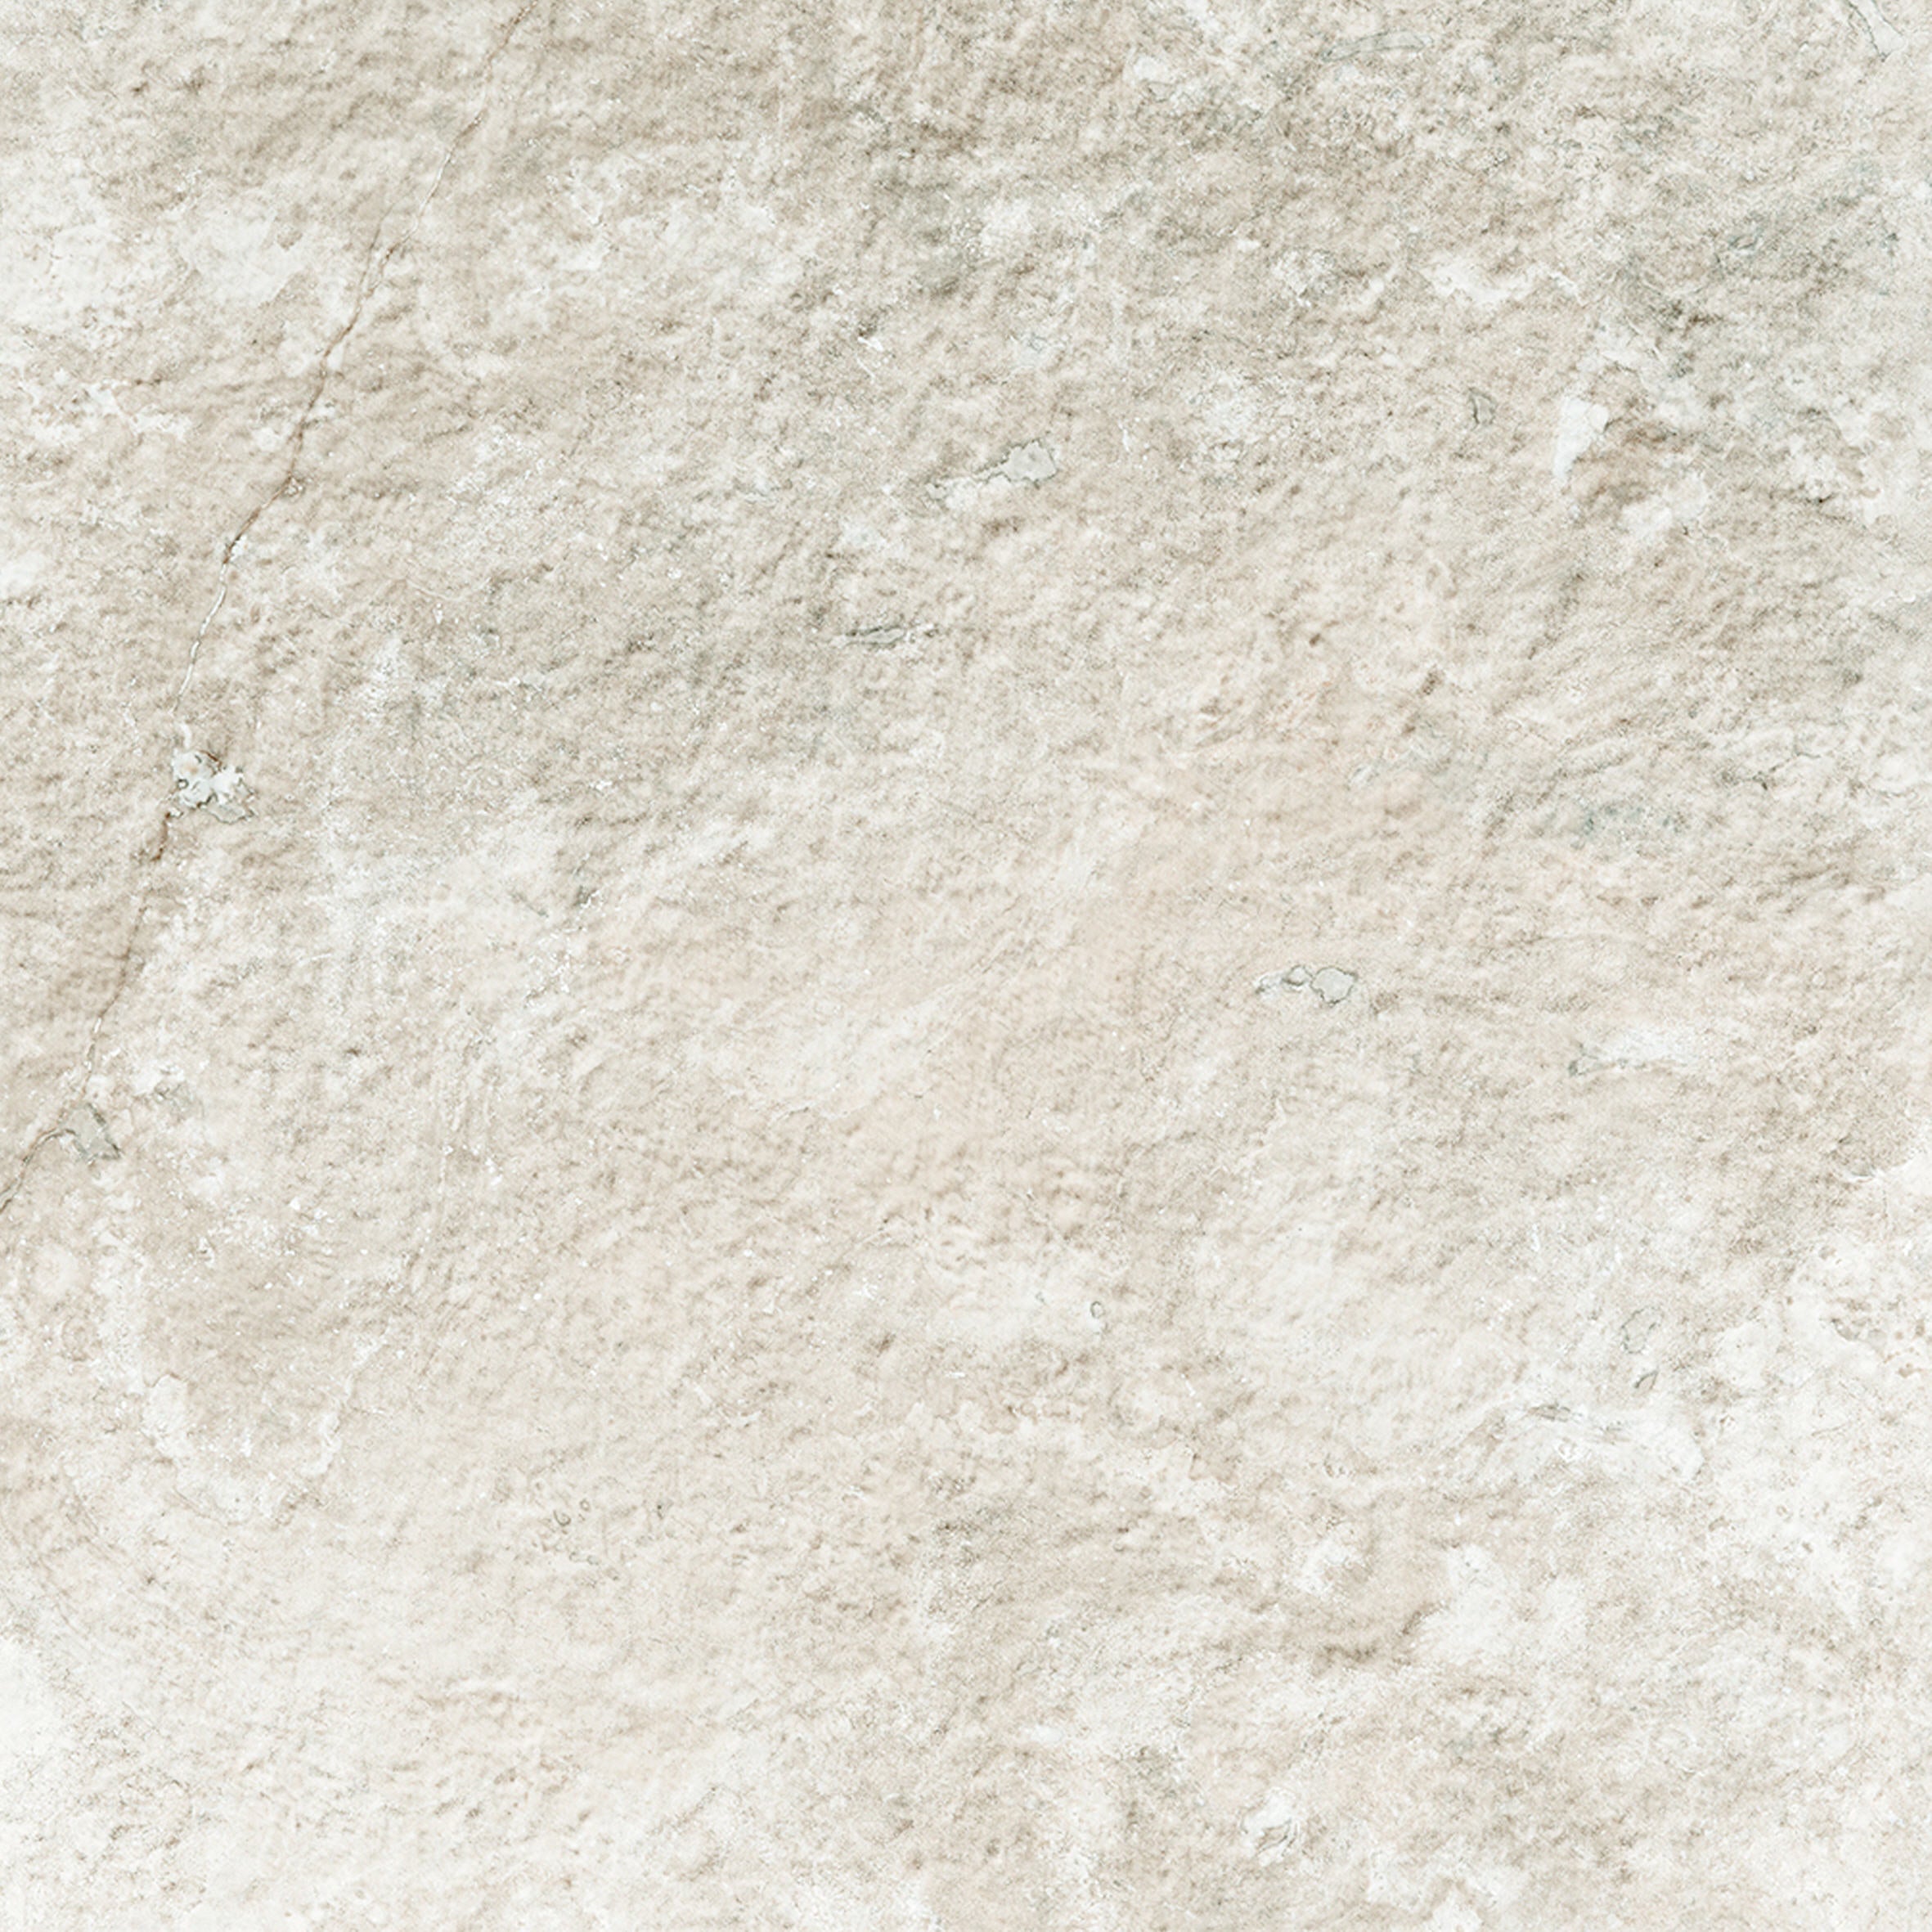 landmark frontier20 travertine cross cut white paver tile 12x12x20mm matte rectified porcelain tile distributed by surface group international